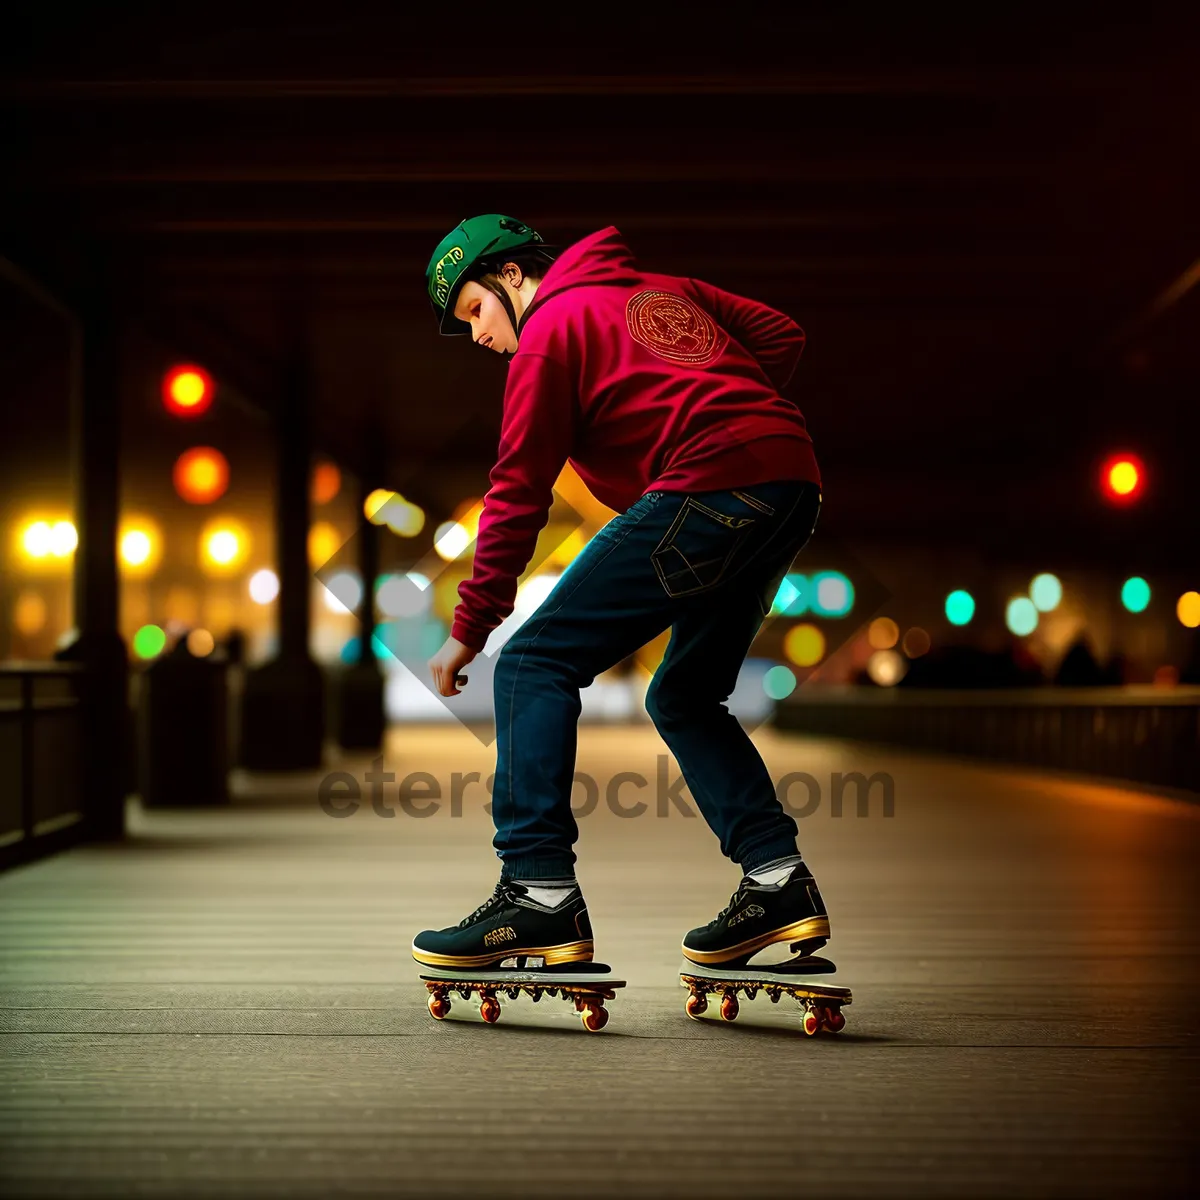 Picture of Skateboarding Man in Action: Thrilling Sports Lifestyle